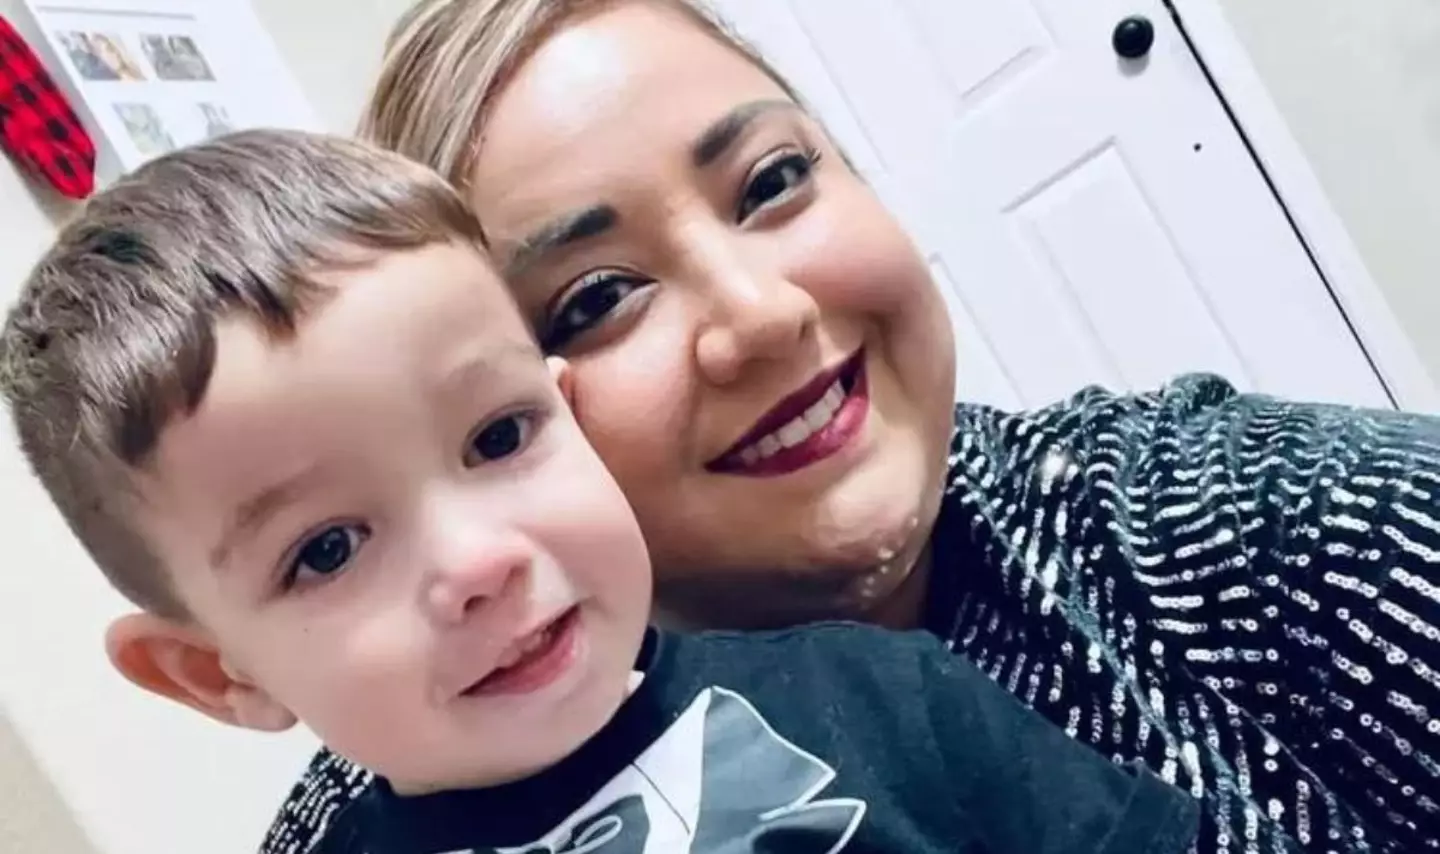 Details regarding Savannah Kriger and her son's death have been released. (Bexar County Sheriff’s Office)